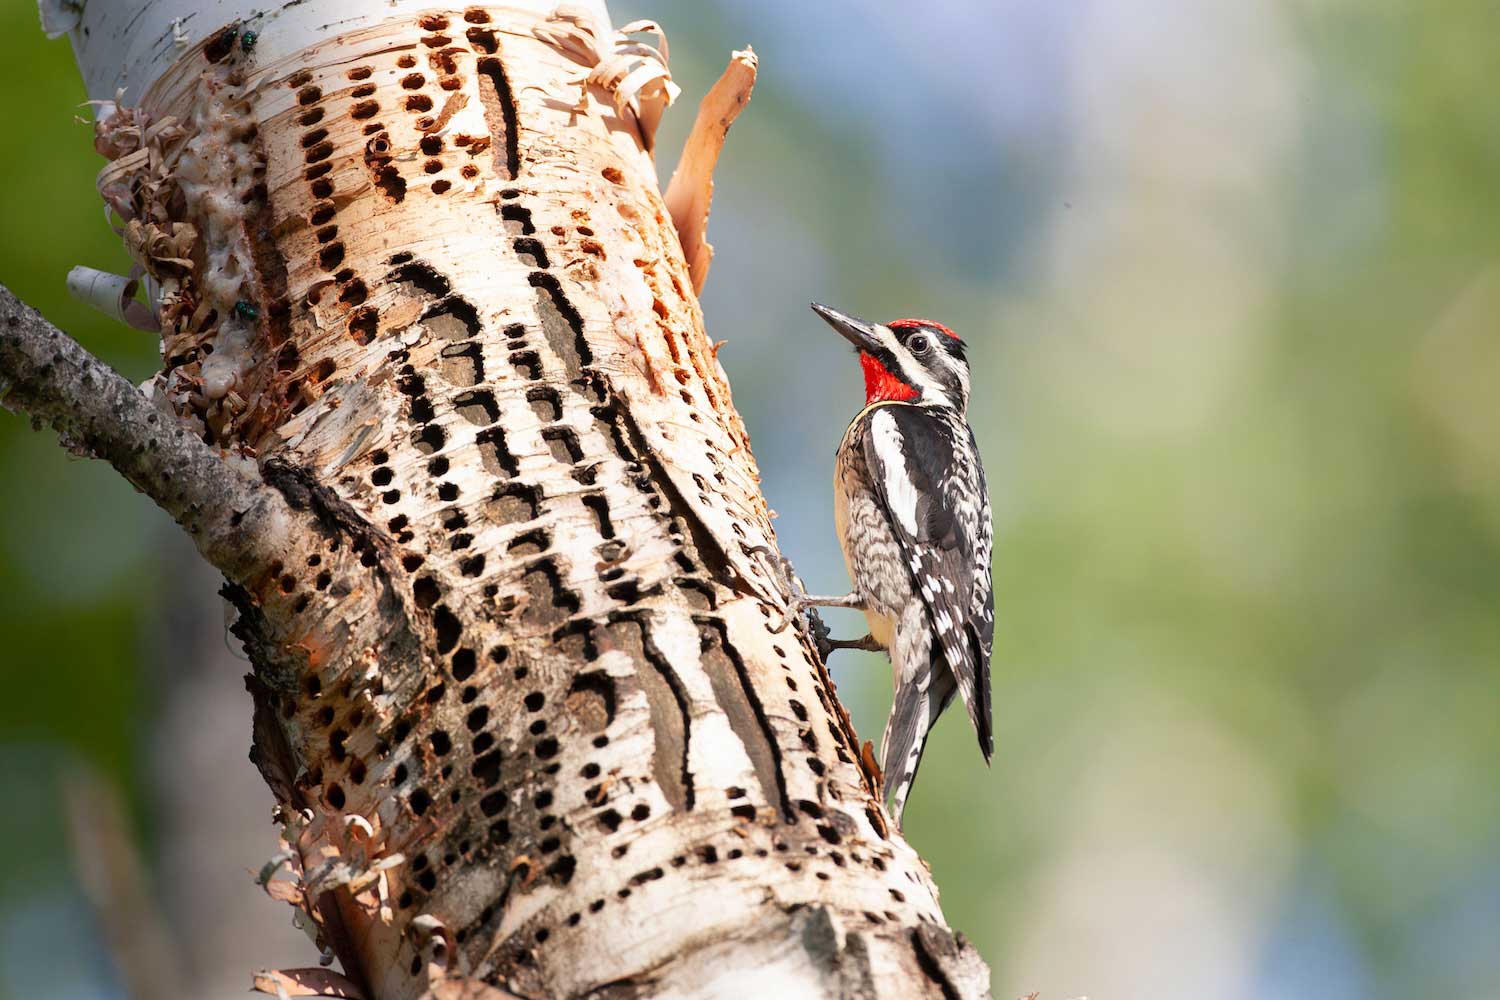 A yellow-bellied sapsucker on a tree full of sap wells.